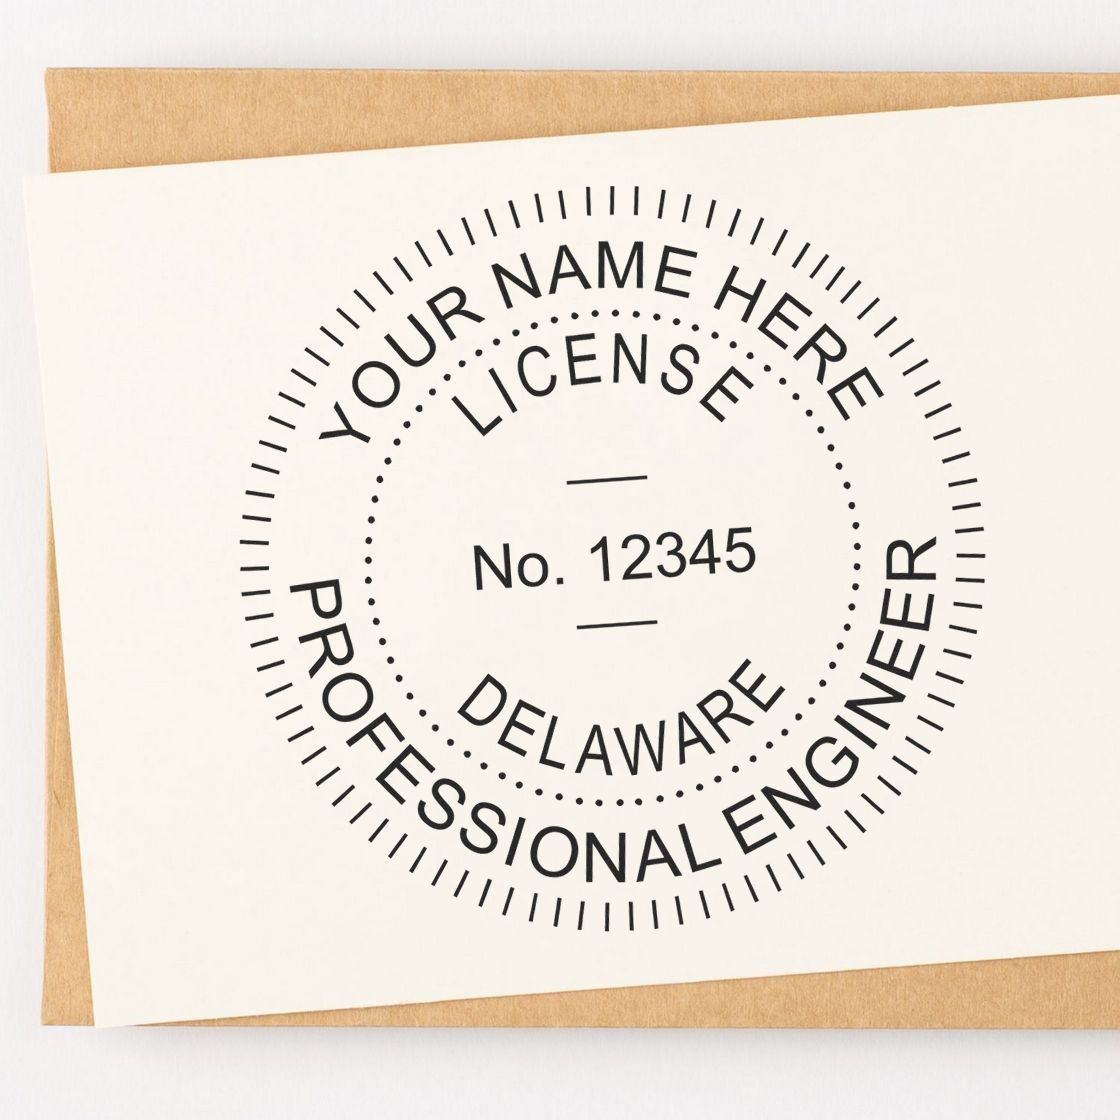 A stamped impression of the Self-Inking Delaware PE Stamp in this stylish lifestyle photo, setting the tone for a unique and personalized product.